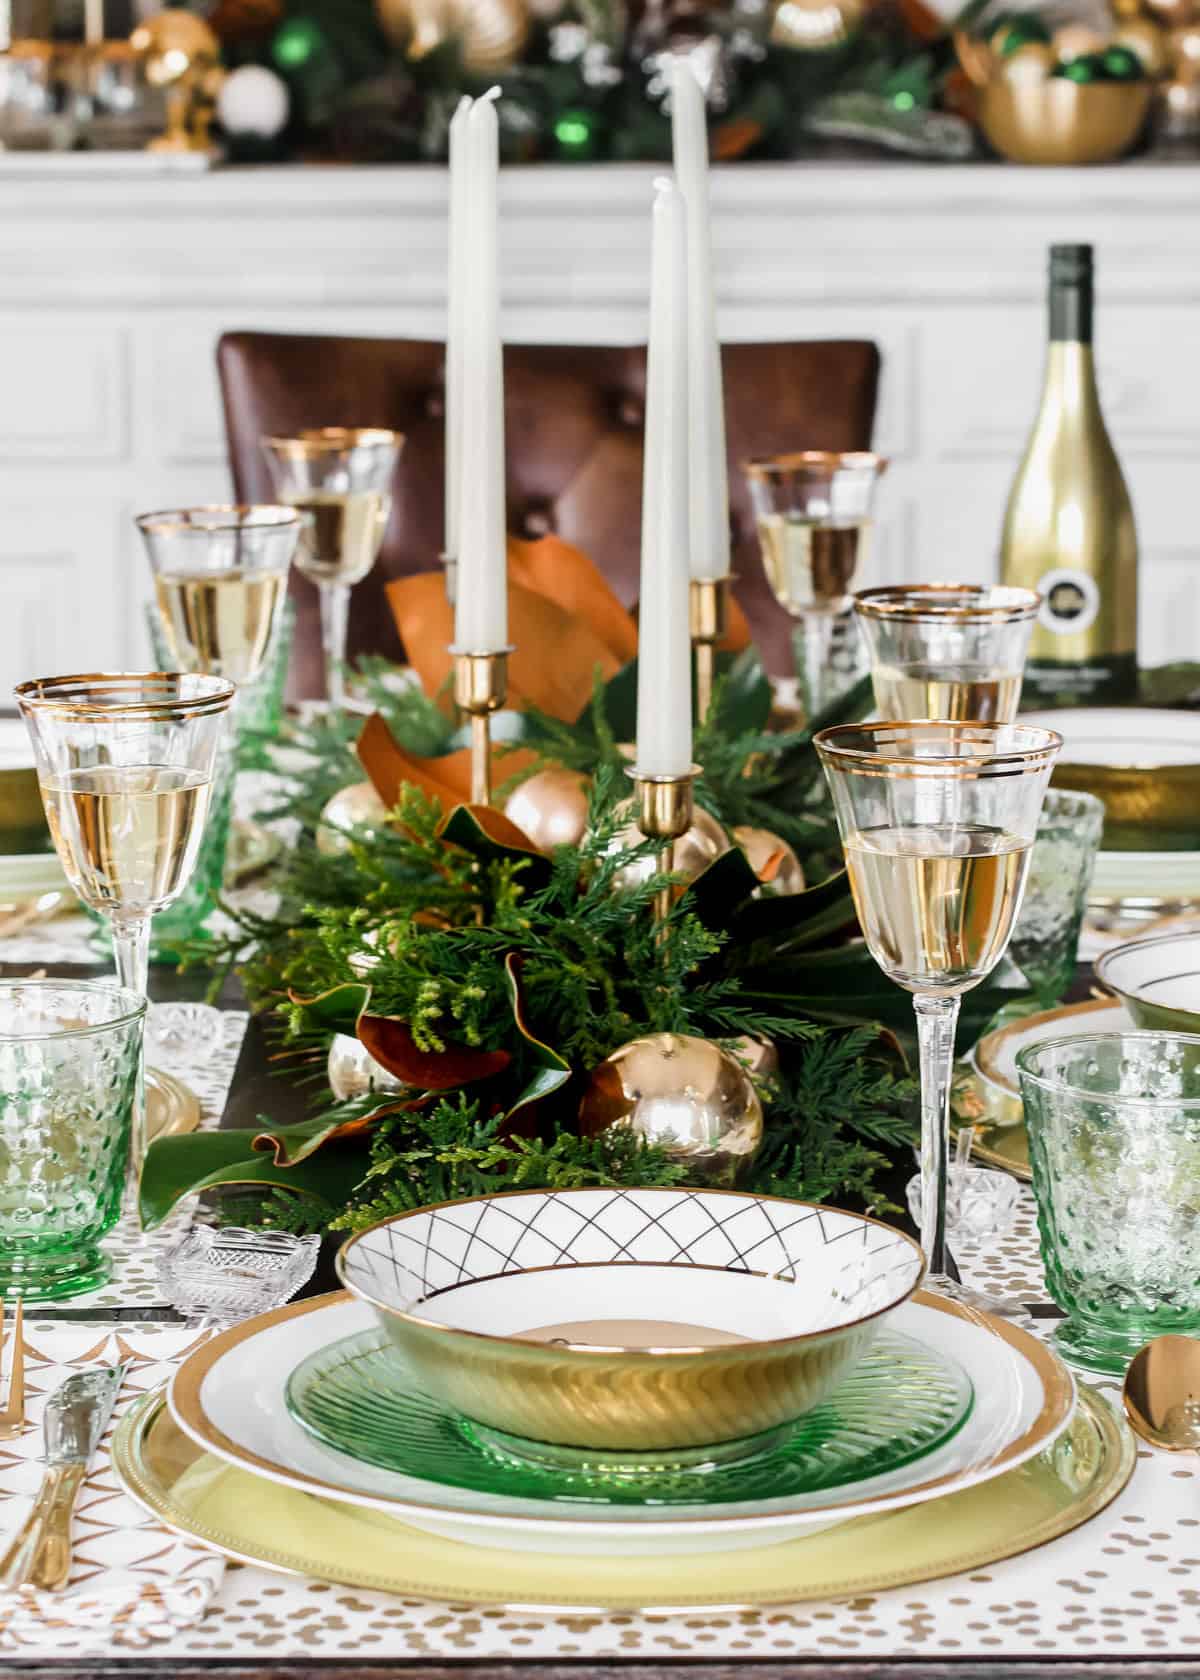 Christmas table setting with green and gold place settings and decoration.